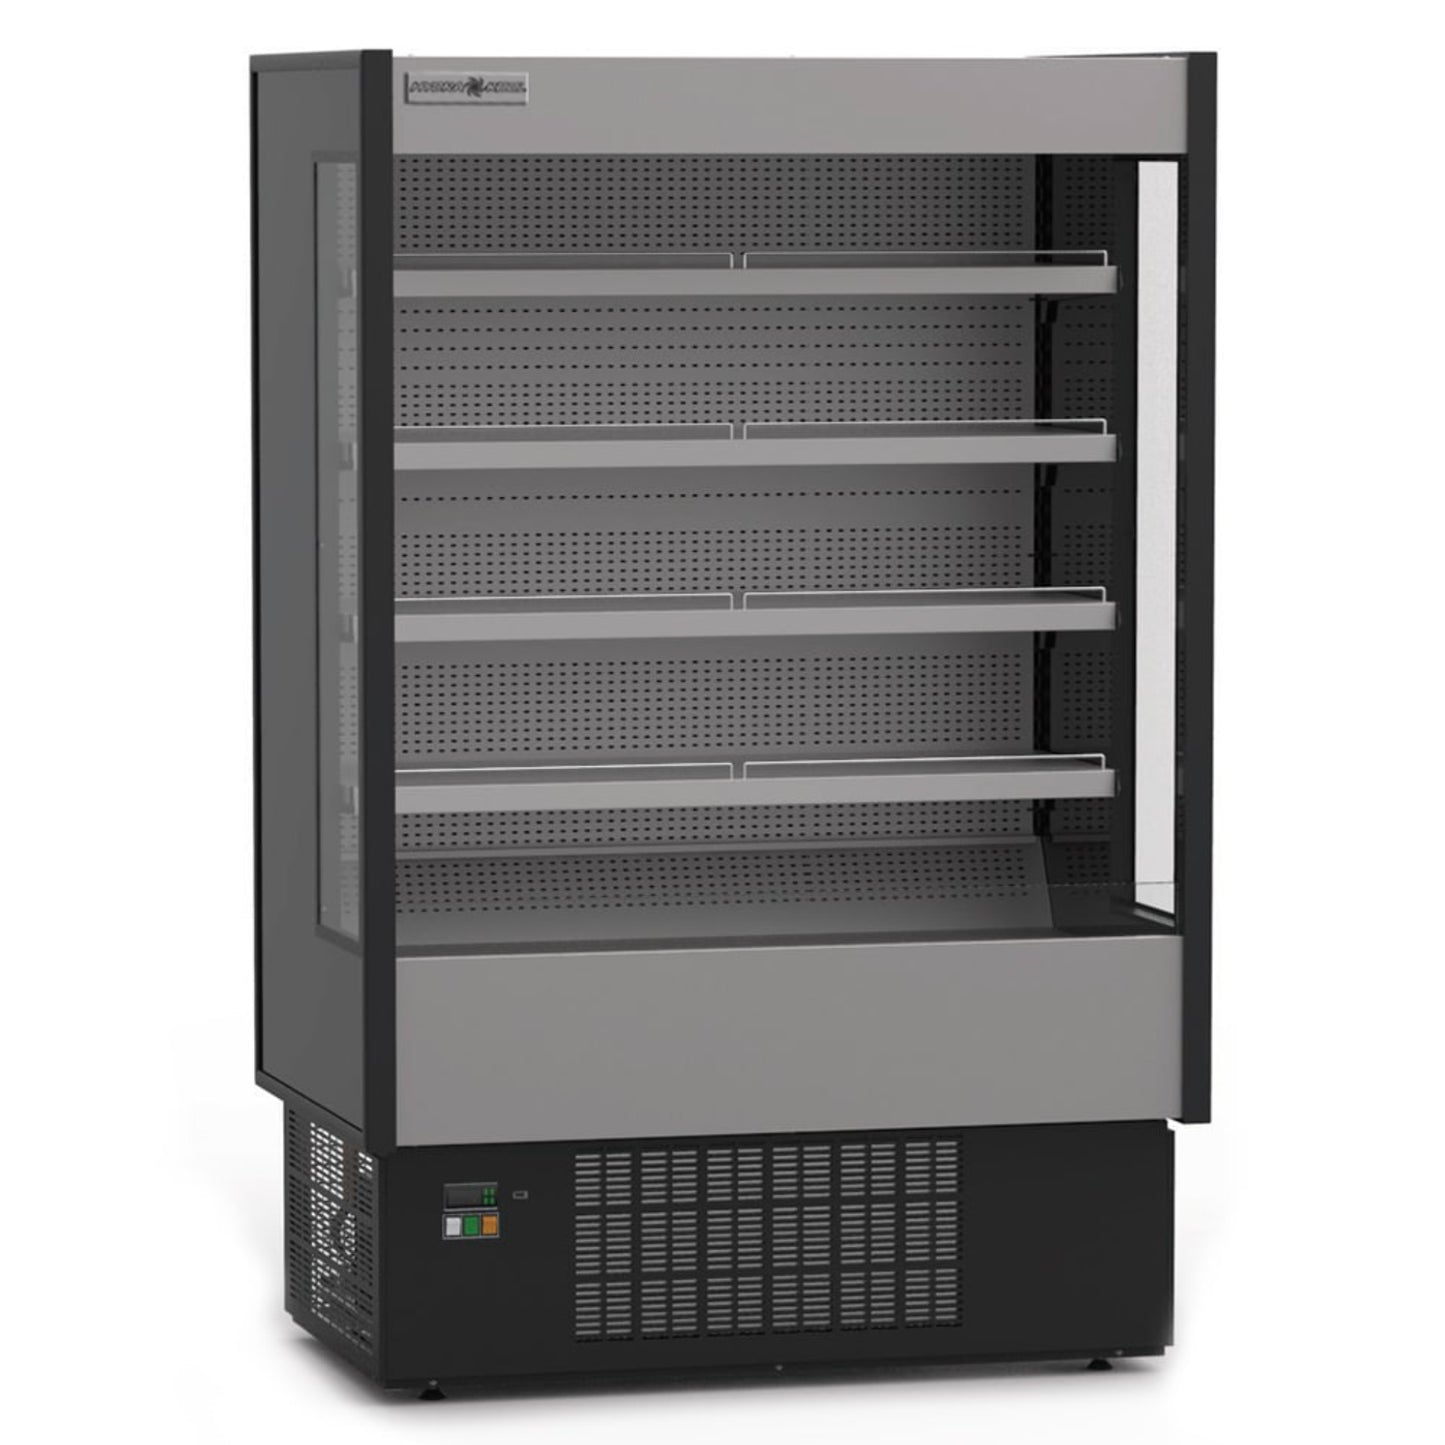 Hydra-Kool KGH-OF-30-S 30" Grab And Go High Profile Self-Contained